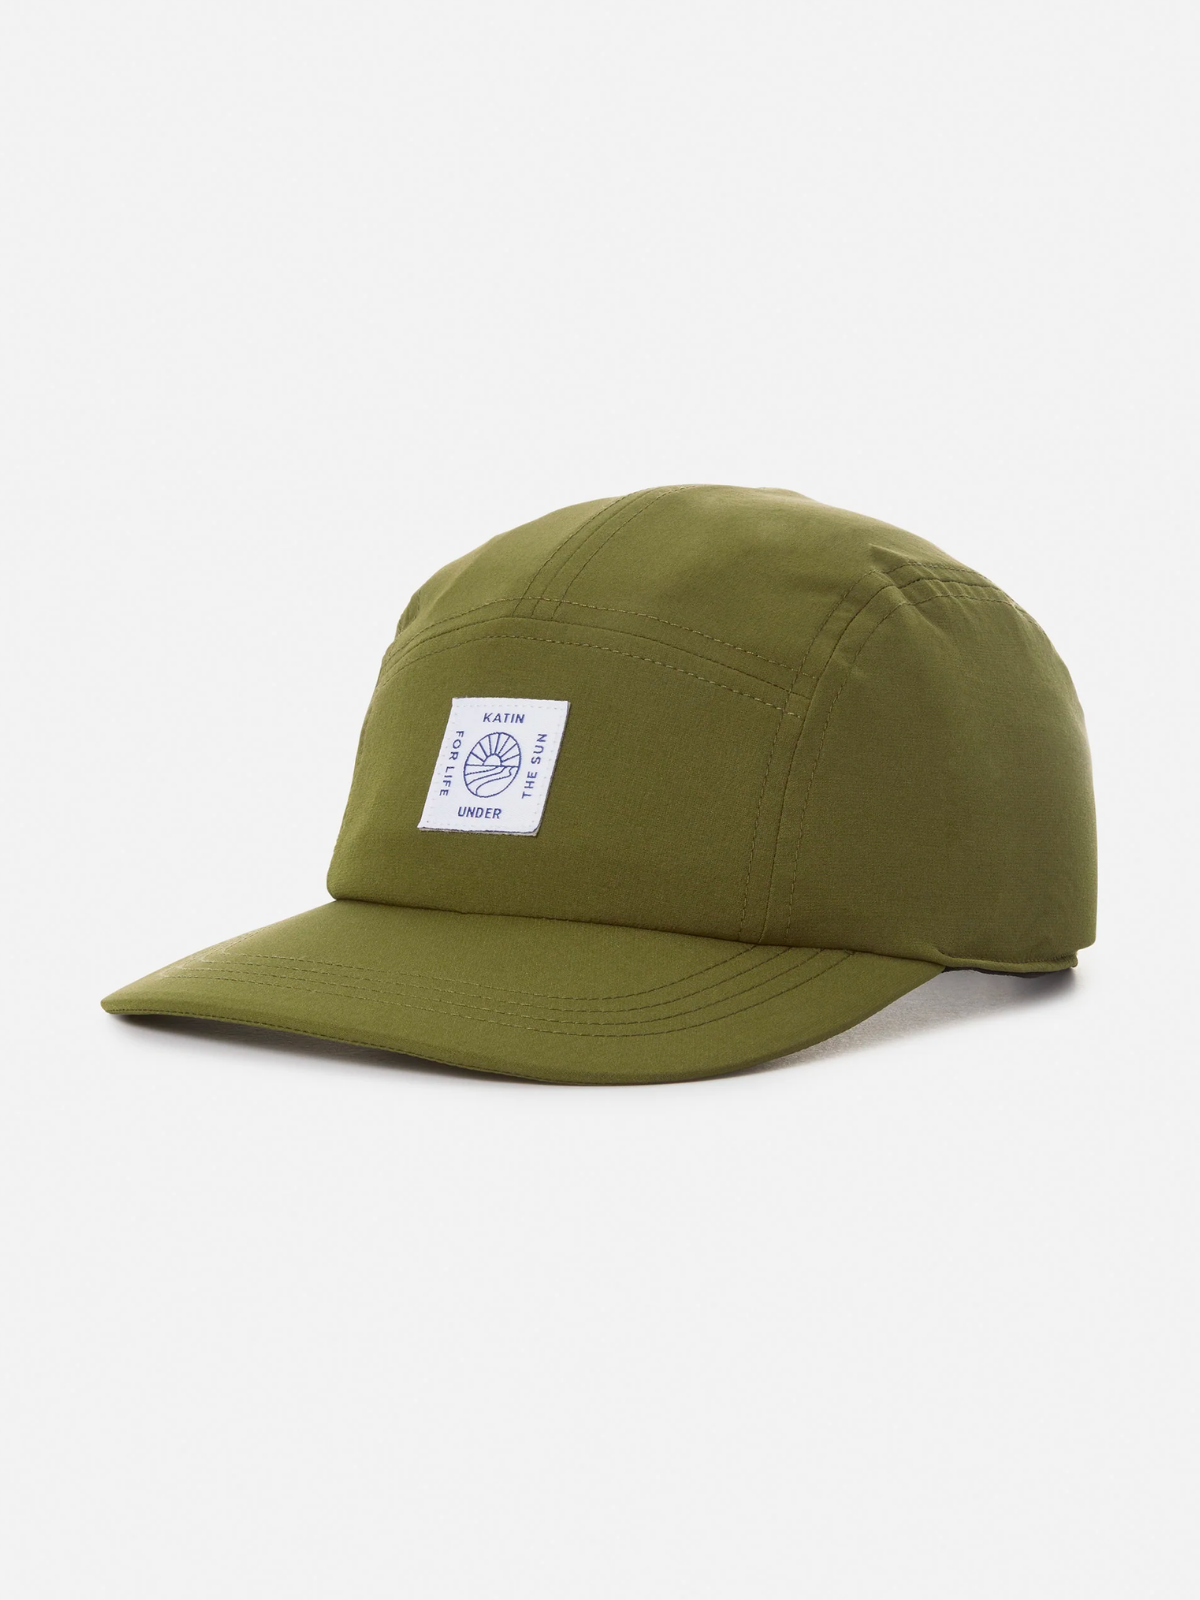 katin otg out there gear scenic hat olive green nylong spandex blend athletic baseball cap velcro adjustable strap kempt athens ga georgia men's clothing store